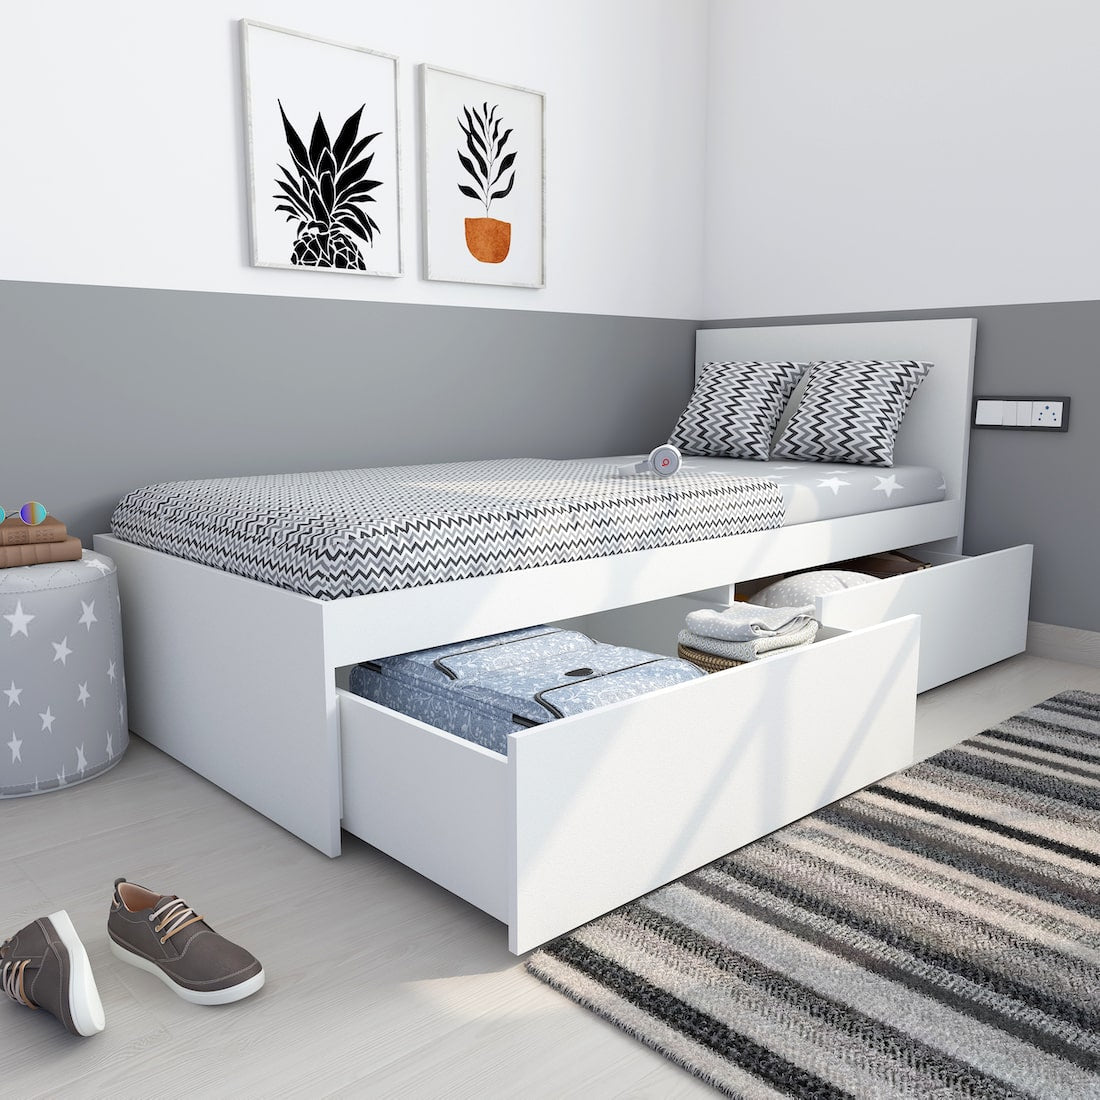 Tribe Single Bed with Headboard (Moonshine White, Matte Finish)